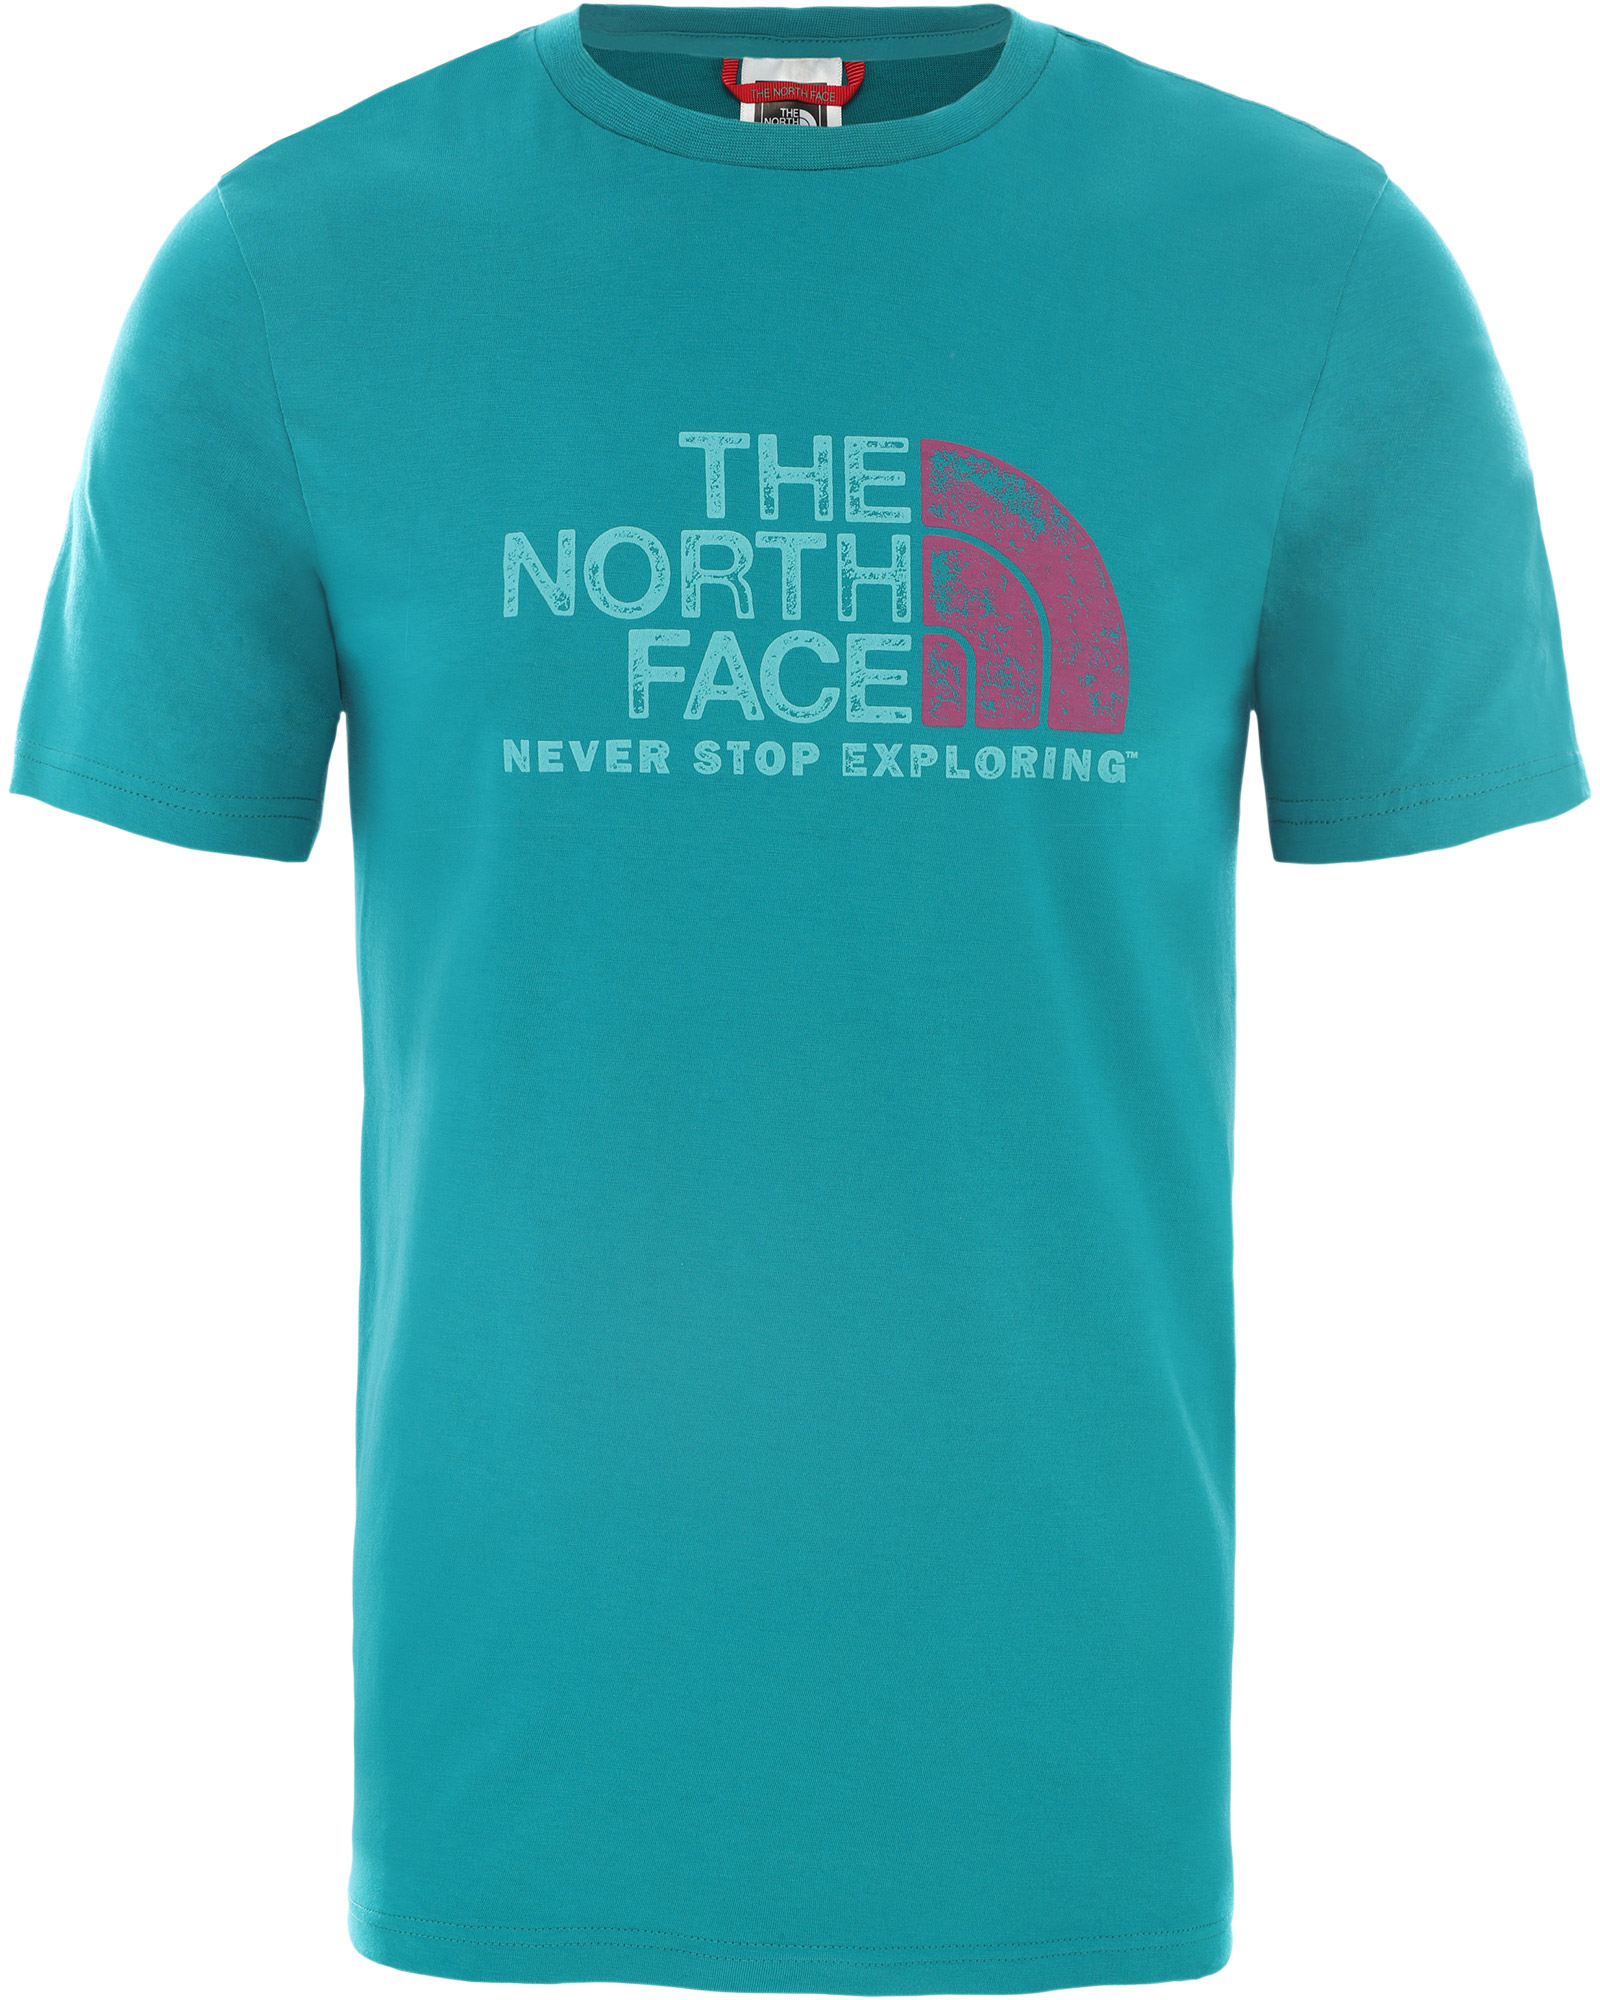 The North Face Rust Mens T-shirt